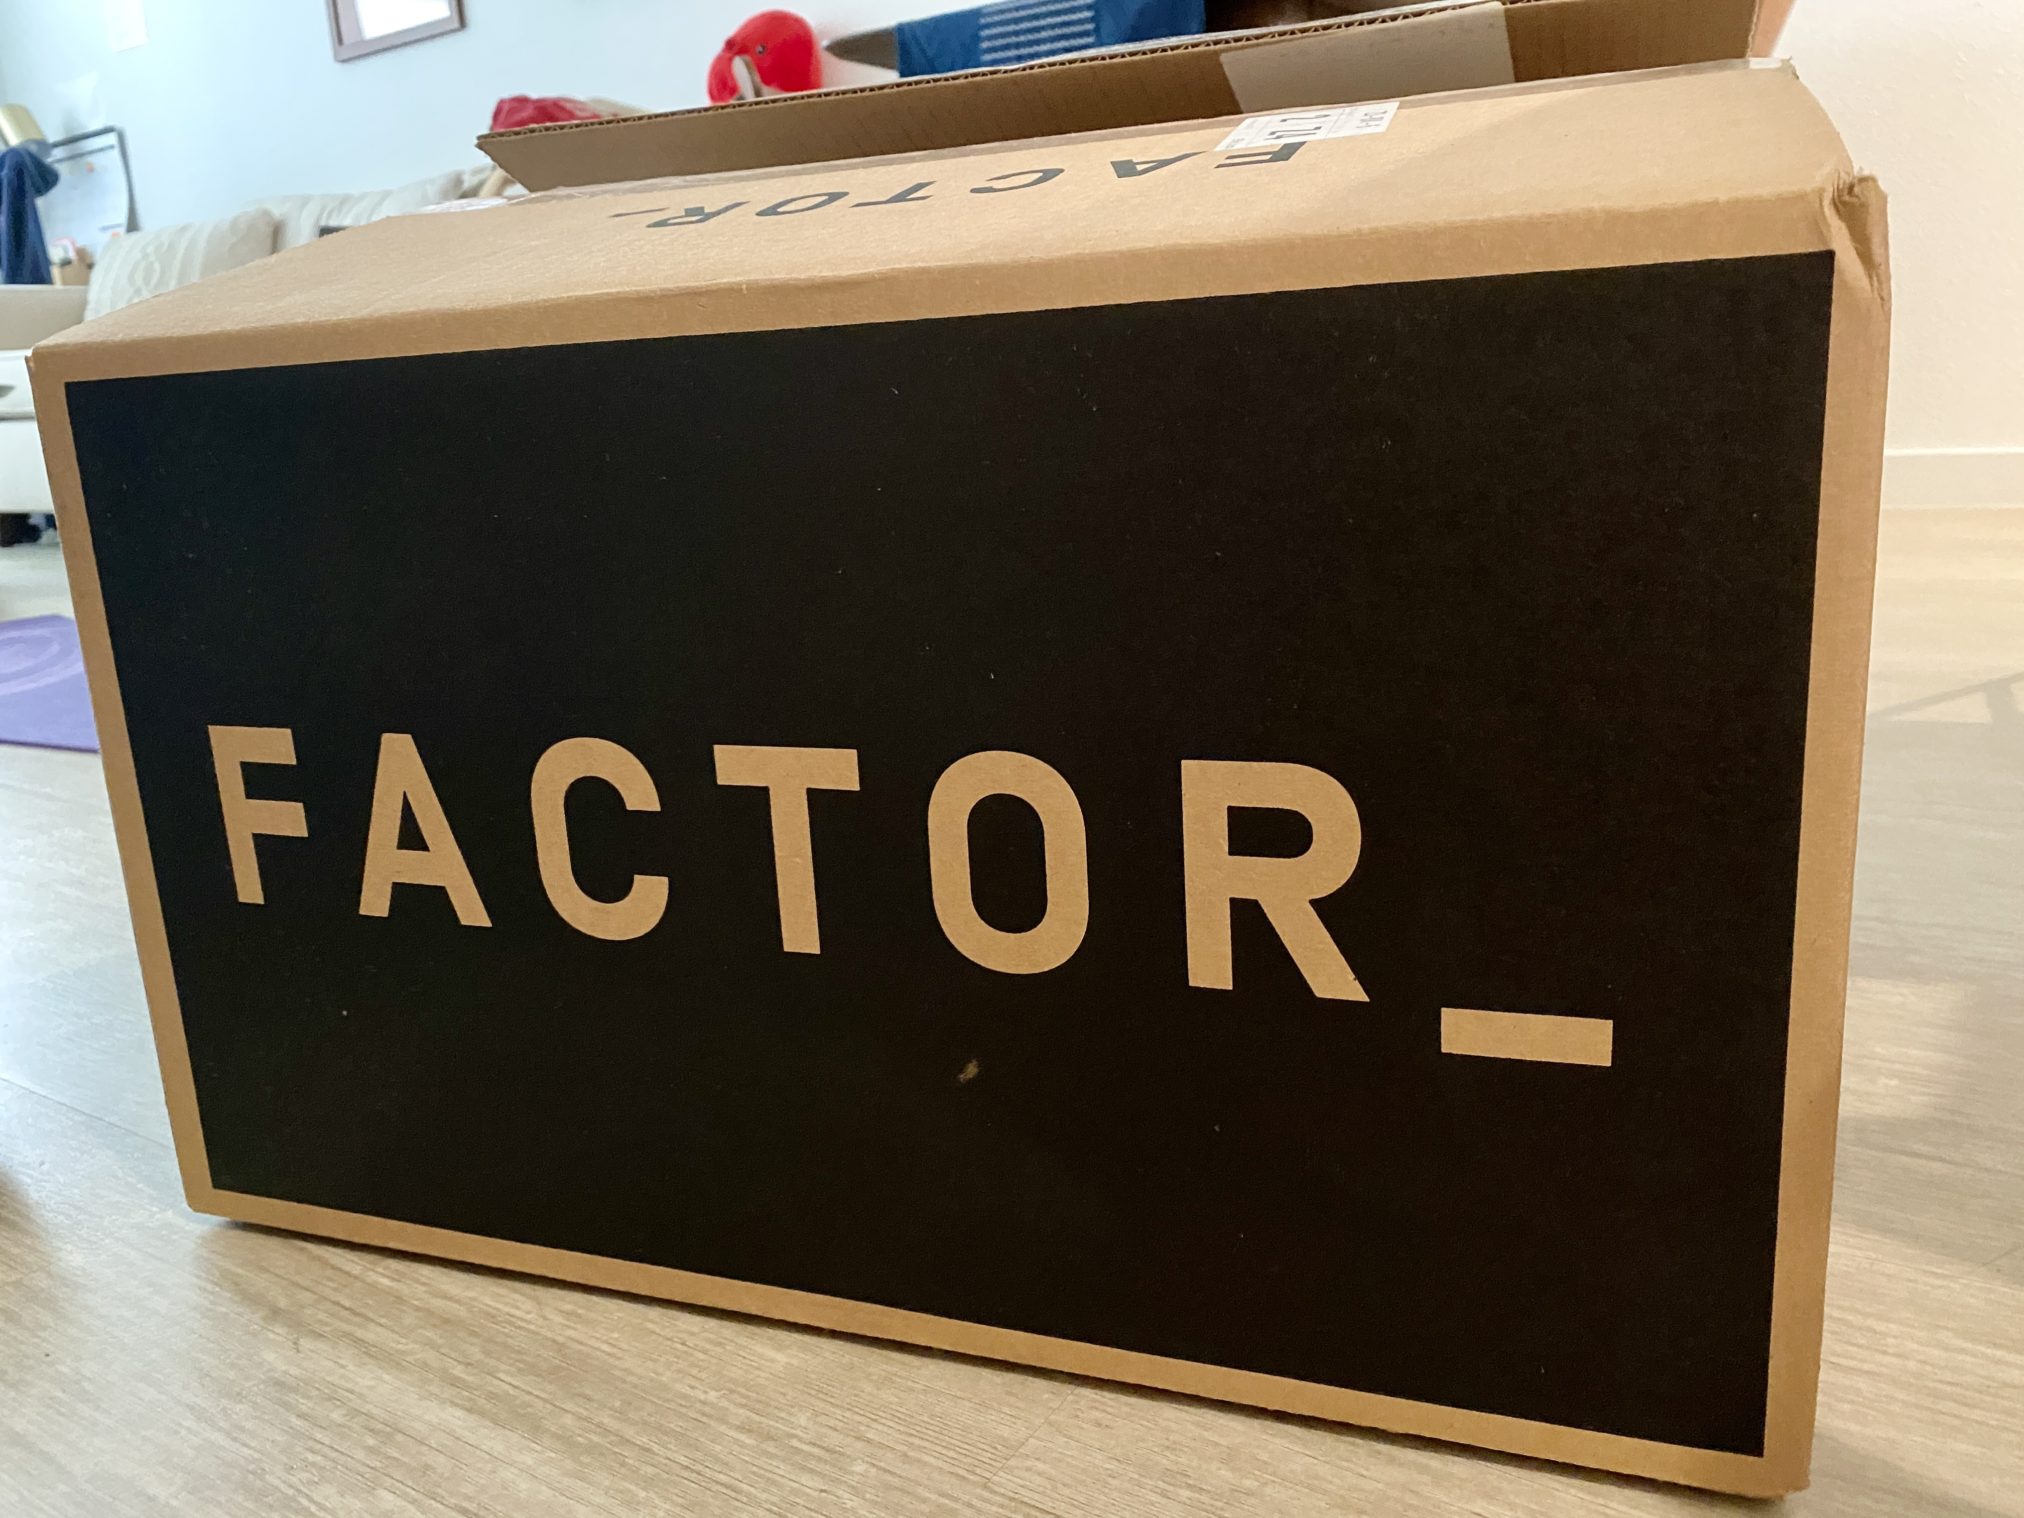 Factor 75 Meal Subscription - Is It Worth The Money